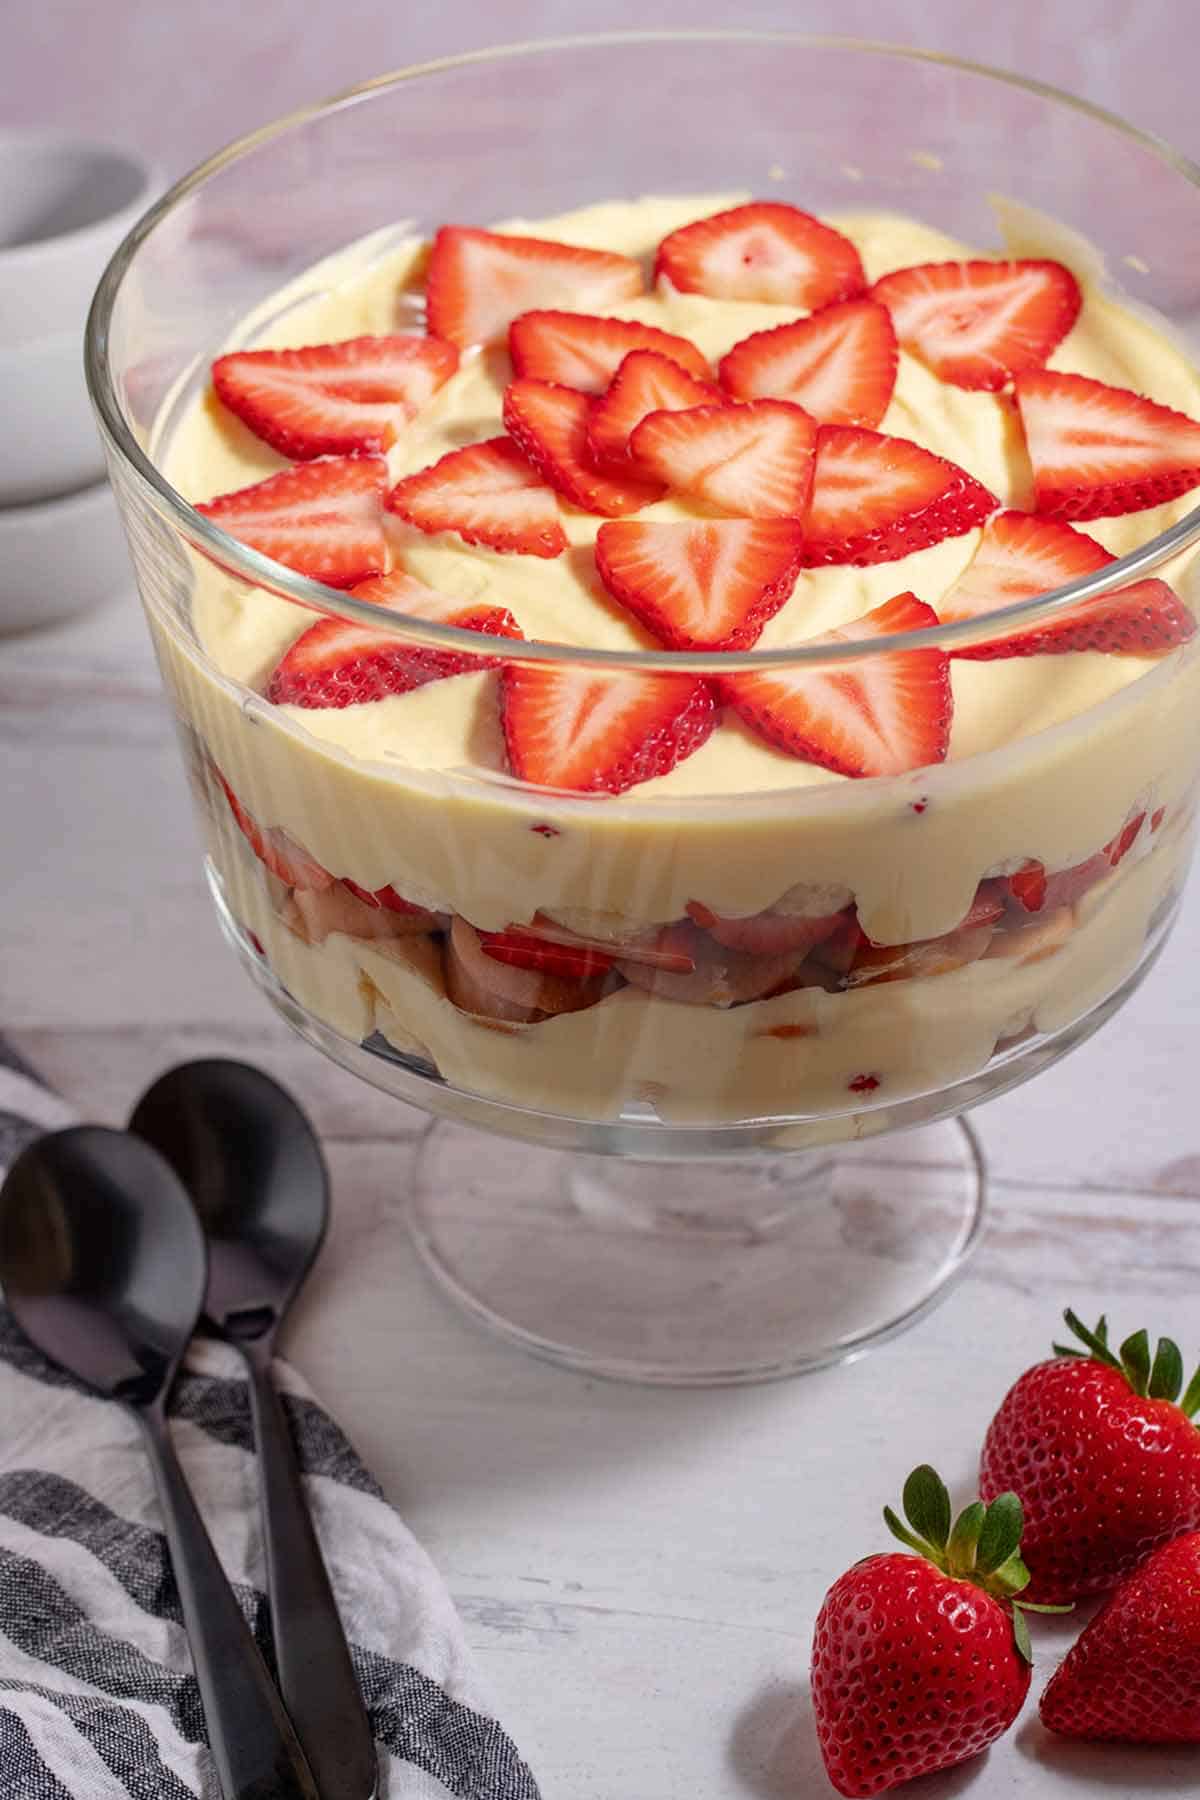 Strawberry banana pudding with strawberries next to it.